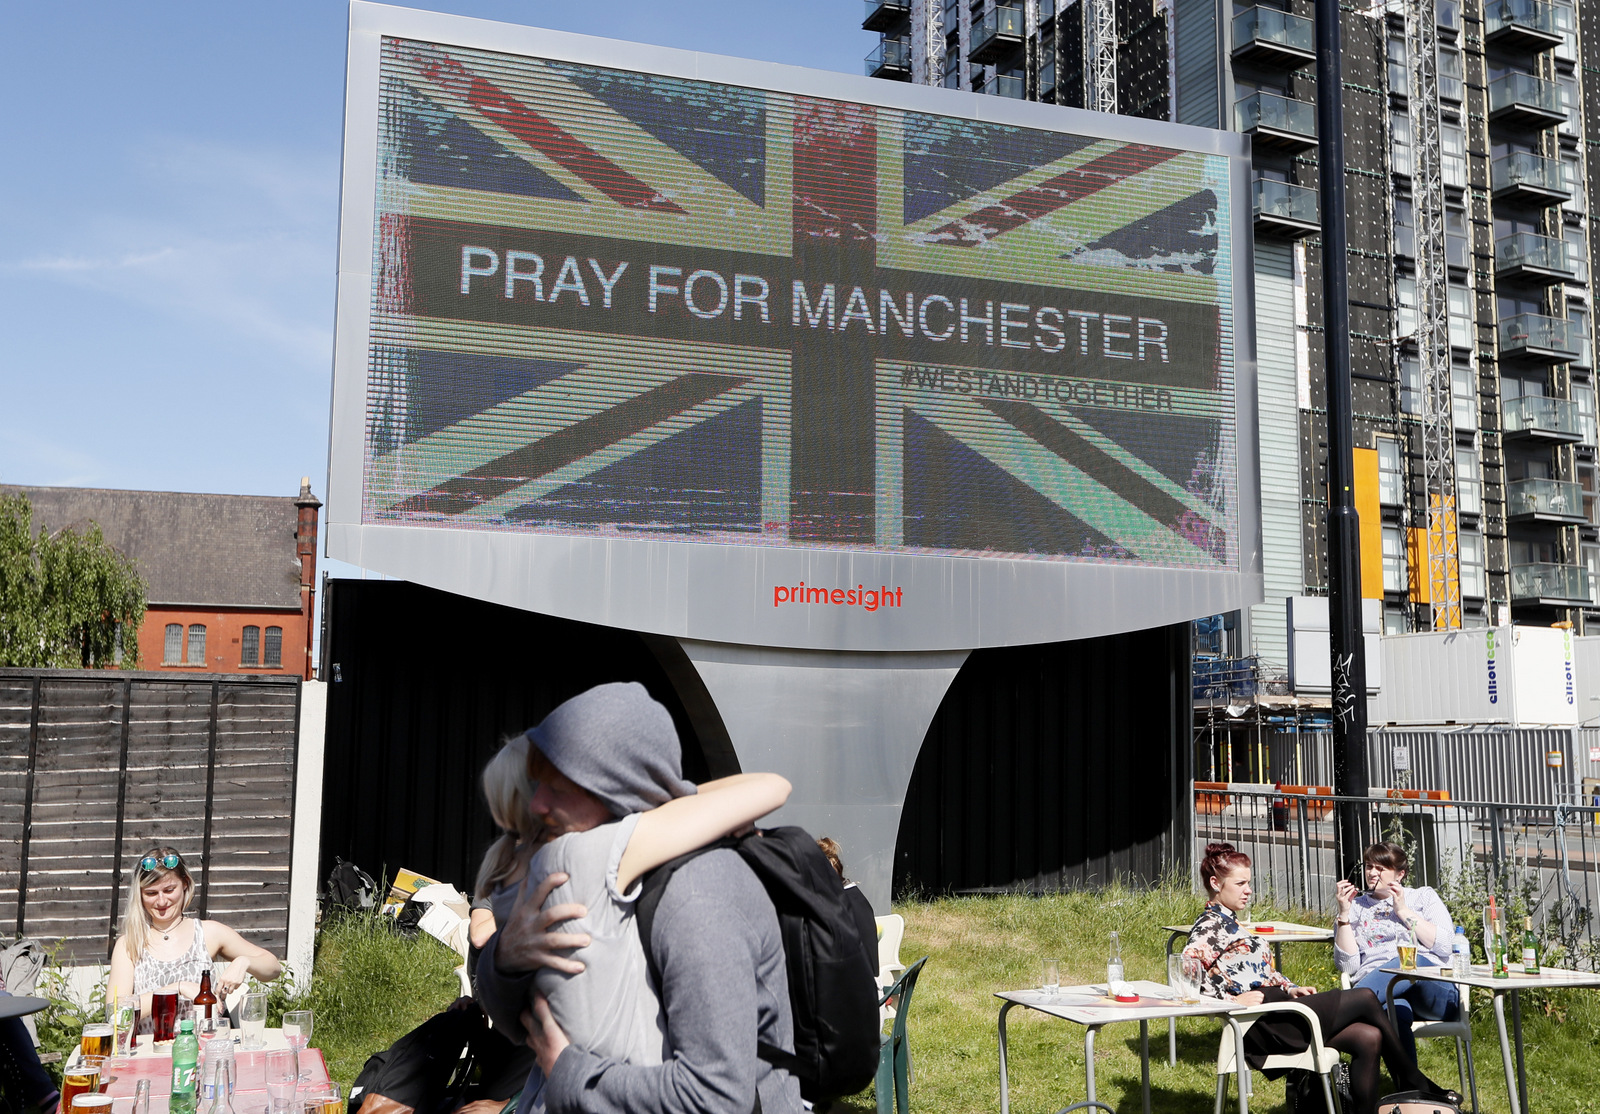 A couple embrace under a billboard in Manchester city centre, Tuesday May 23, 2017, the day after the suicide attack at an Ariana Grande concert that left 22 people dead as it ended on Monday night. (AP/Kirsty Wigglesworth)